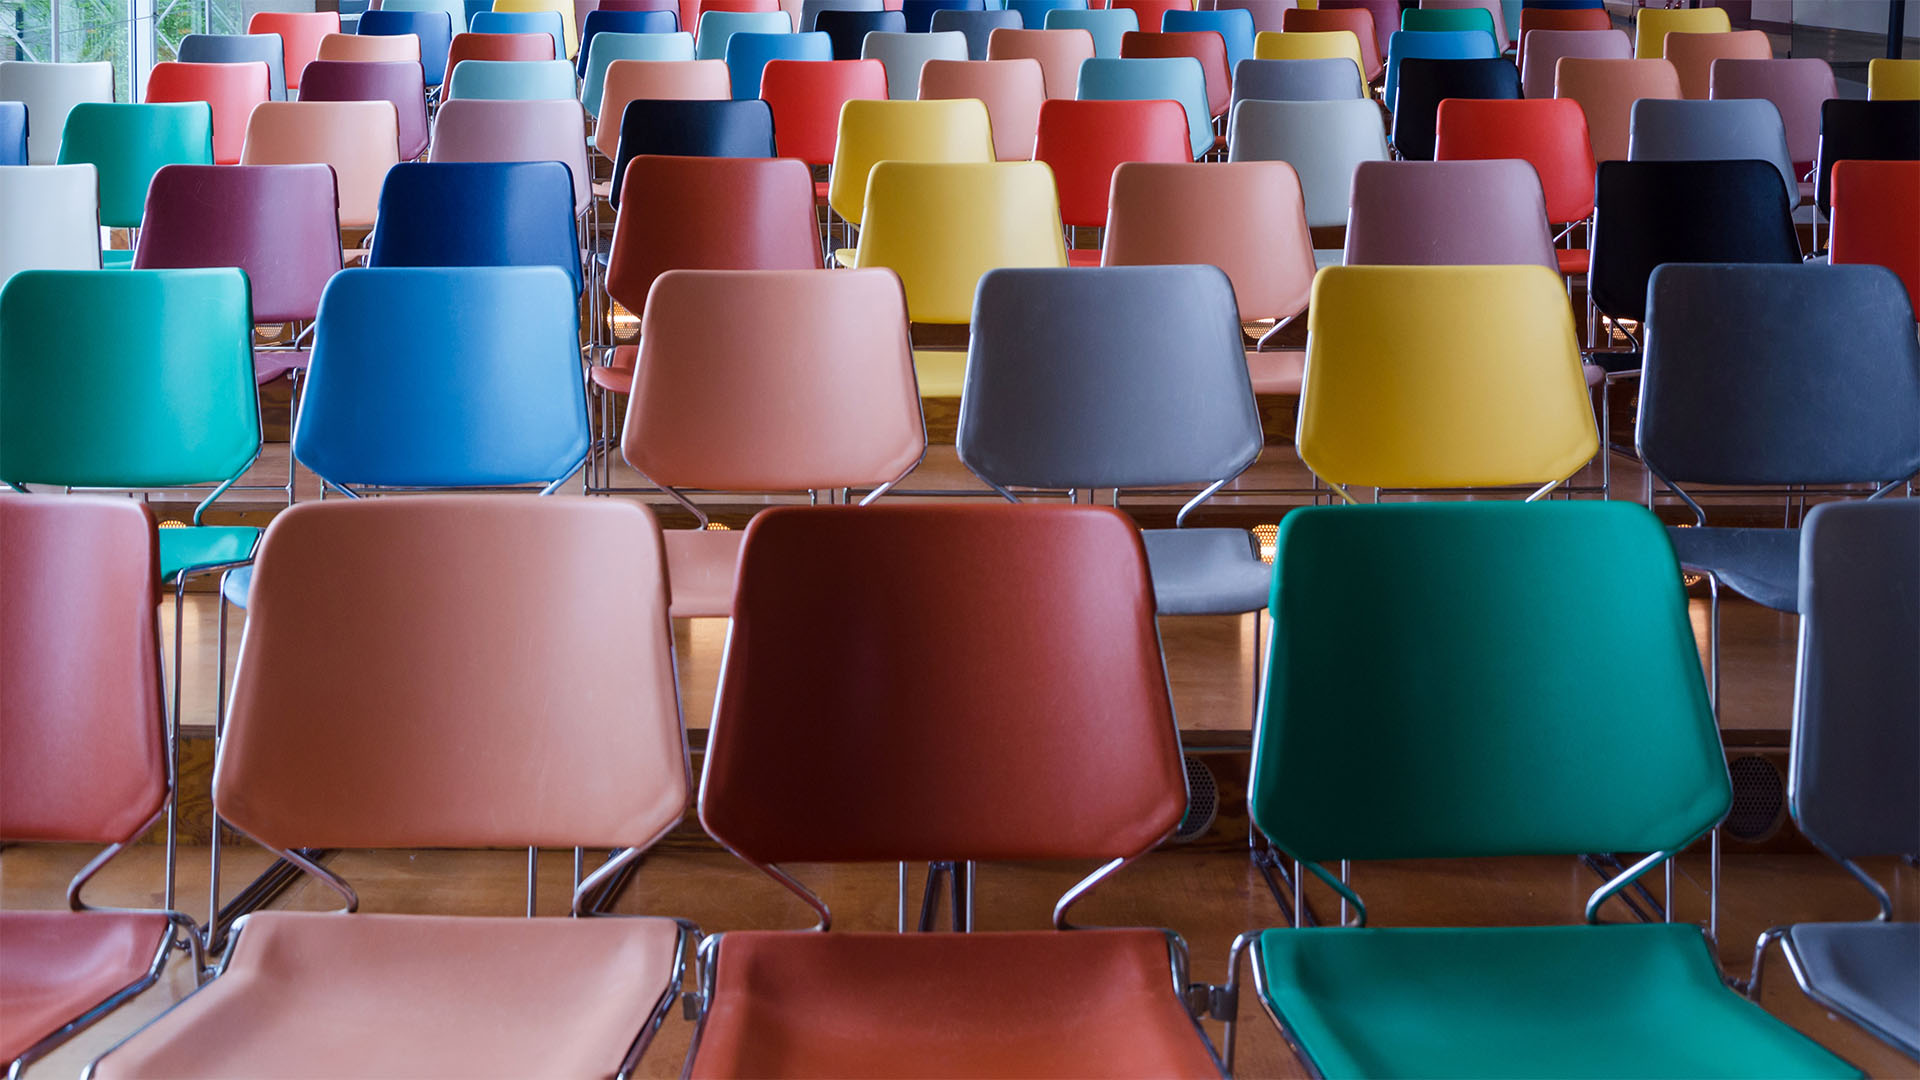 Rows of colored chairs